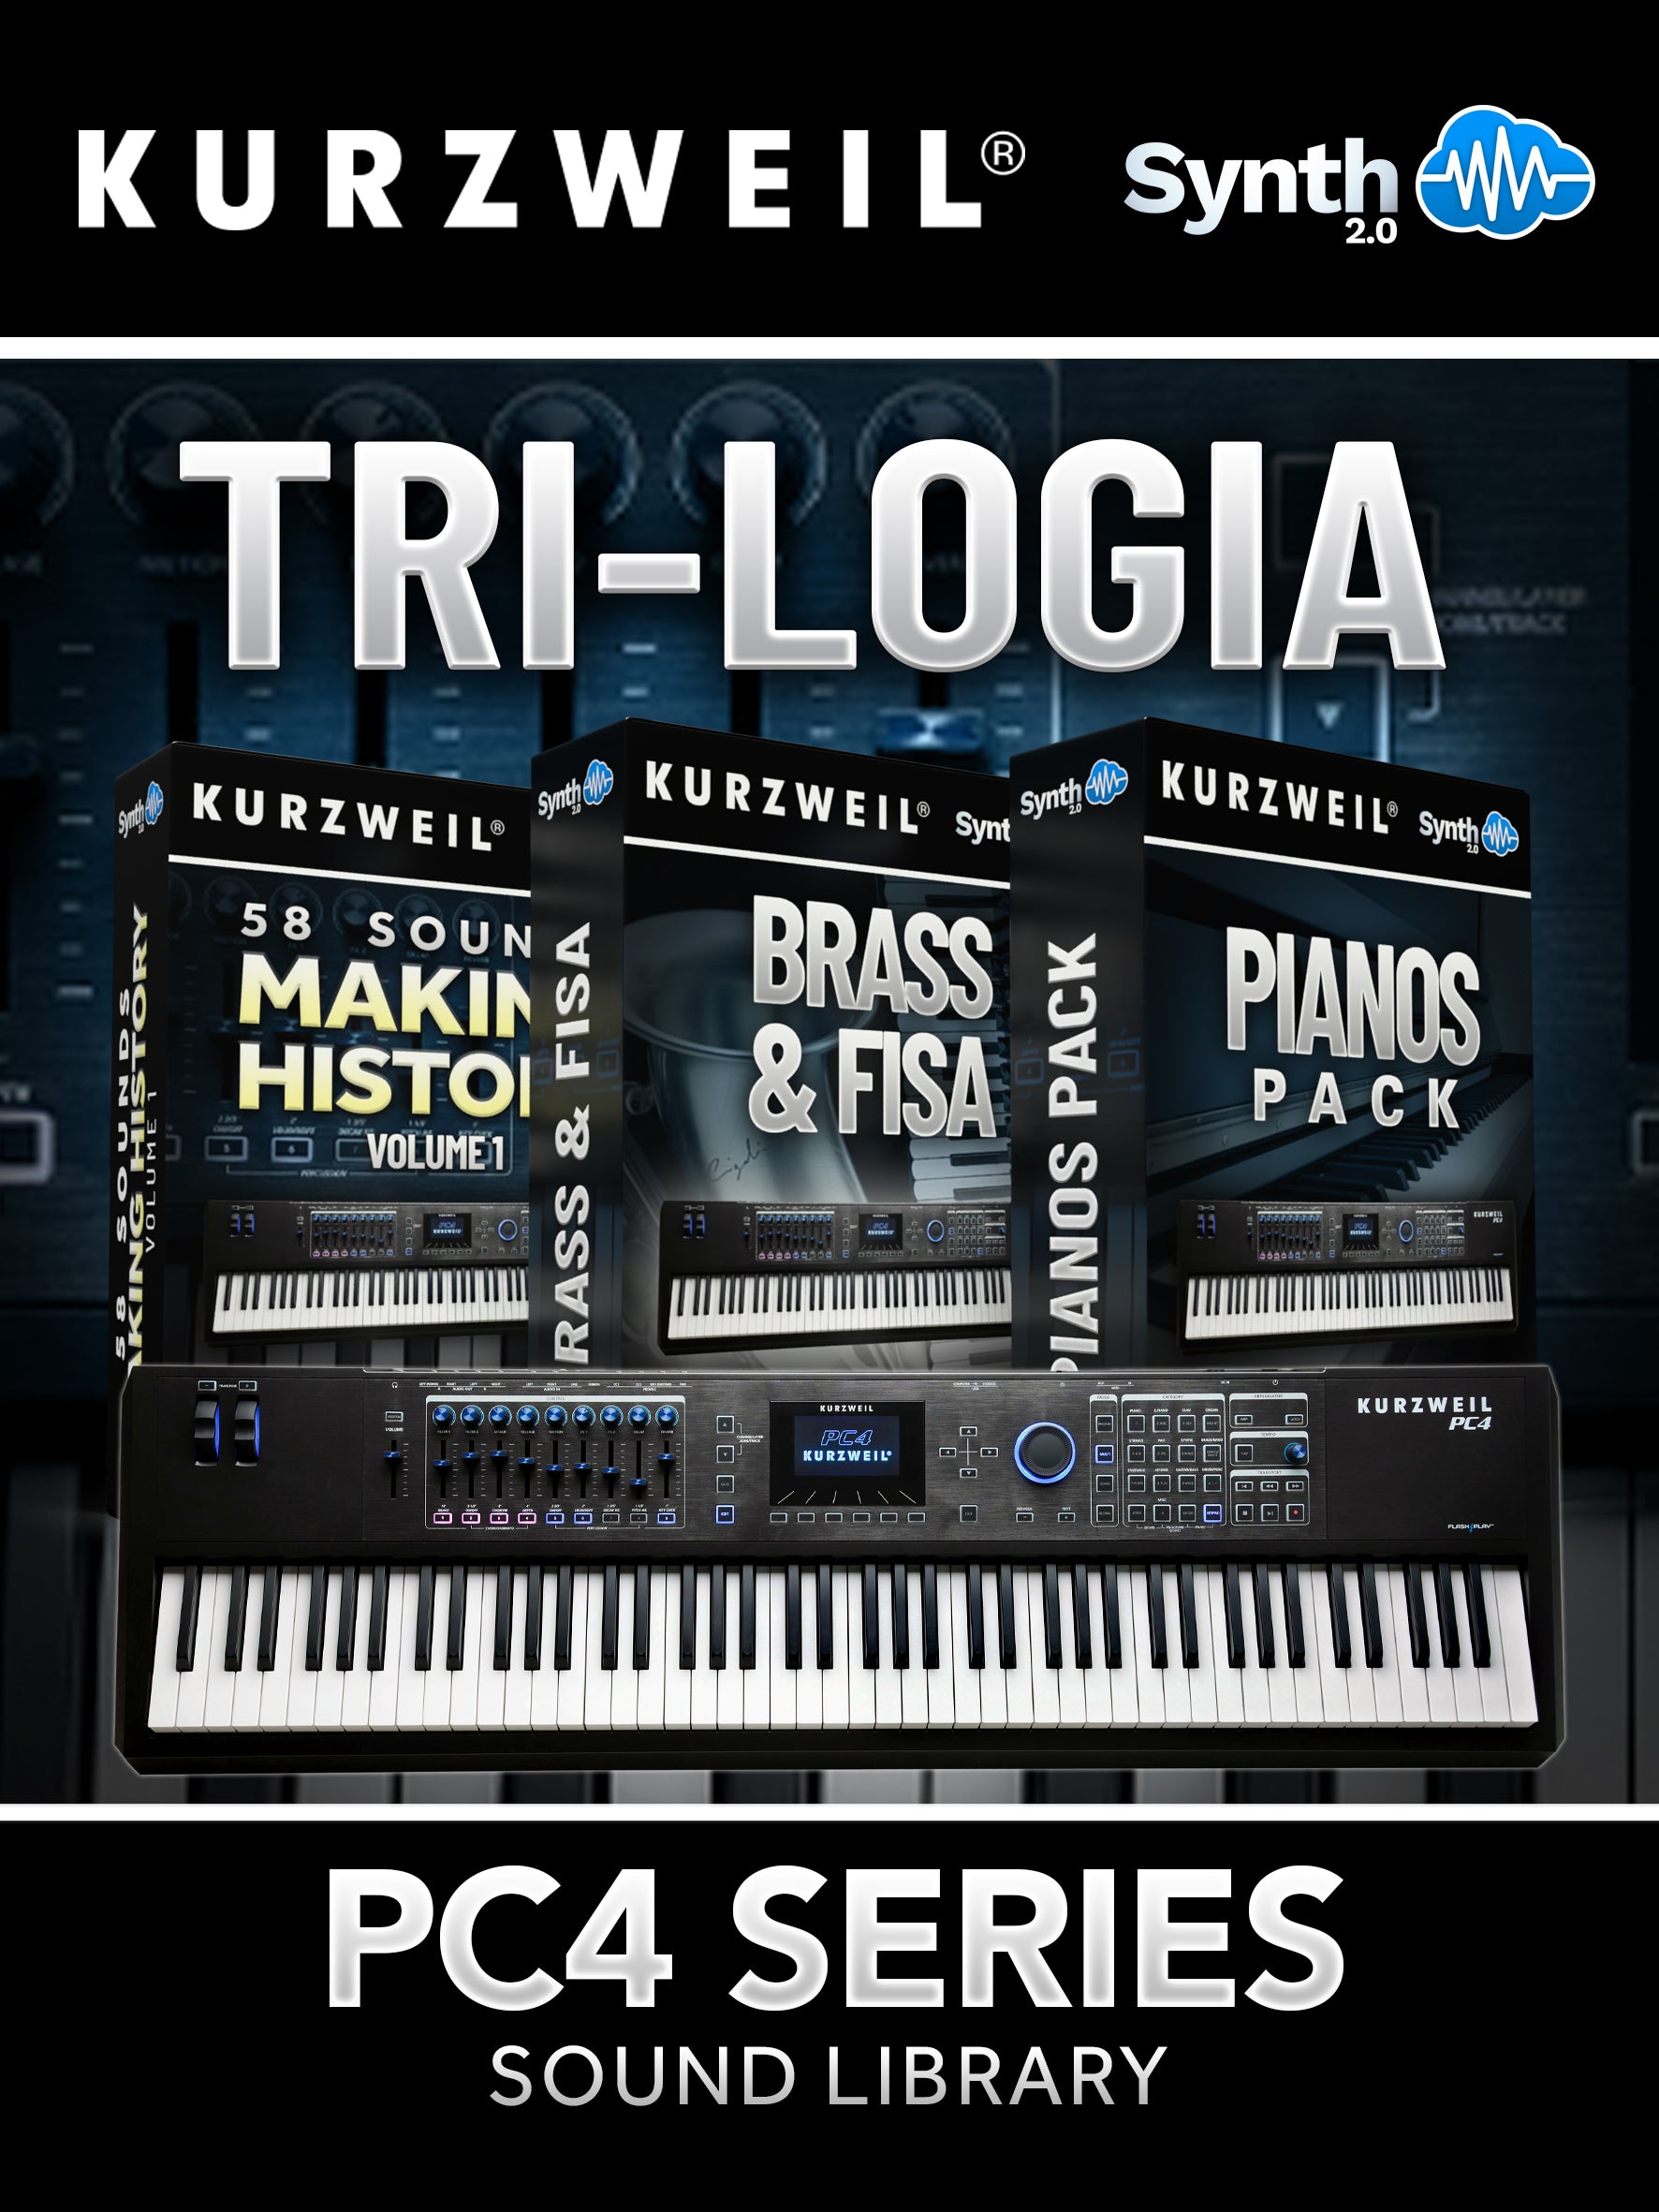 PC4018 - Tri-logia Library - Kurzweil PC4 Series ( over 90 presets )